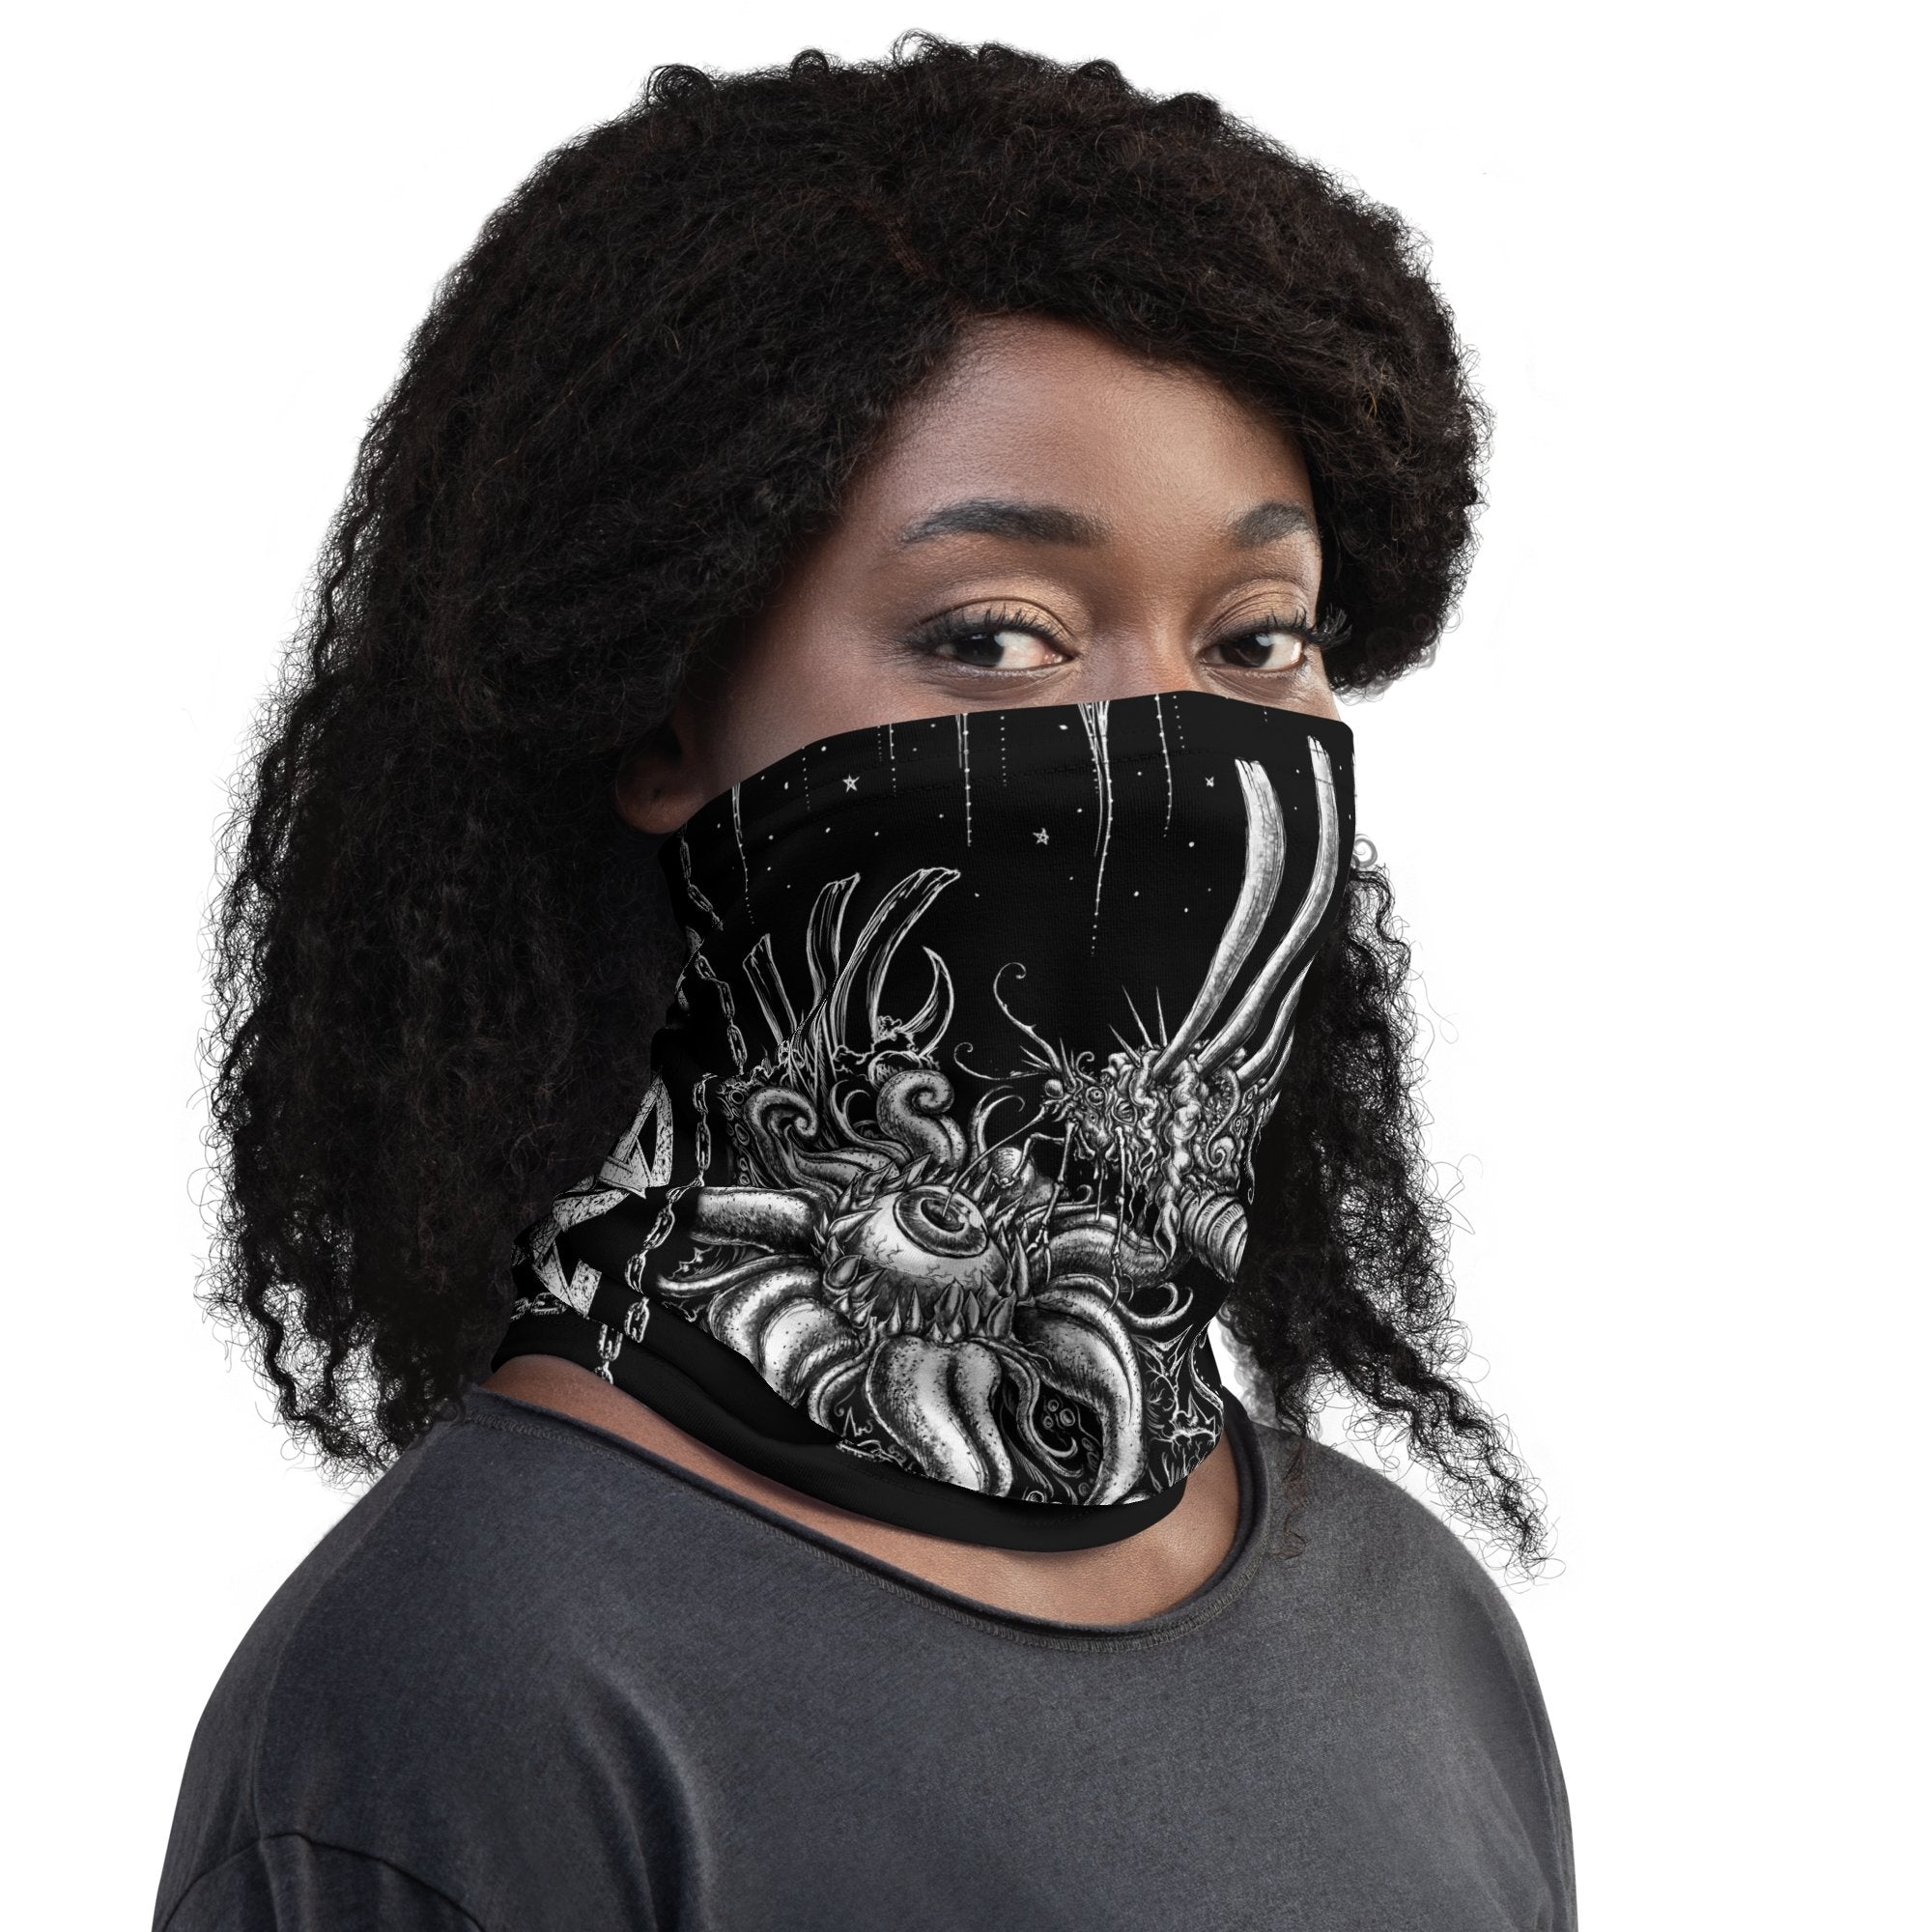 Horror Neck Gaiter, Face Mask, Head Covering, Gothic Hell, Street Outfit - Bloodfly - Abysm Internal